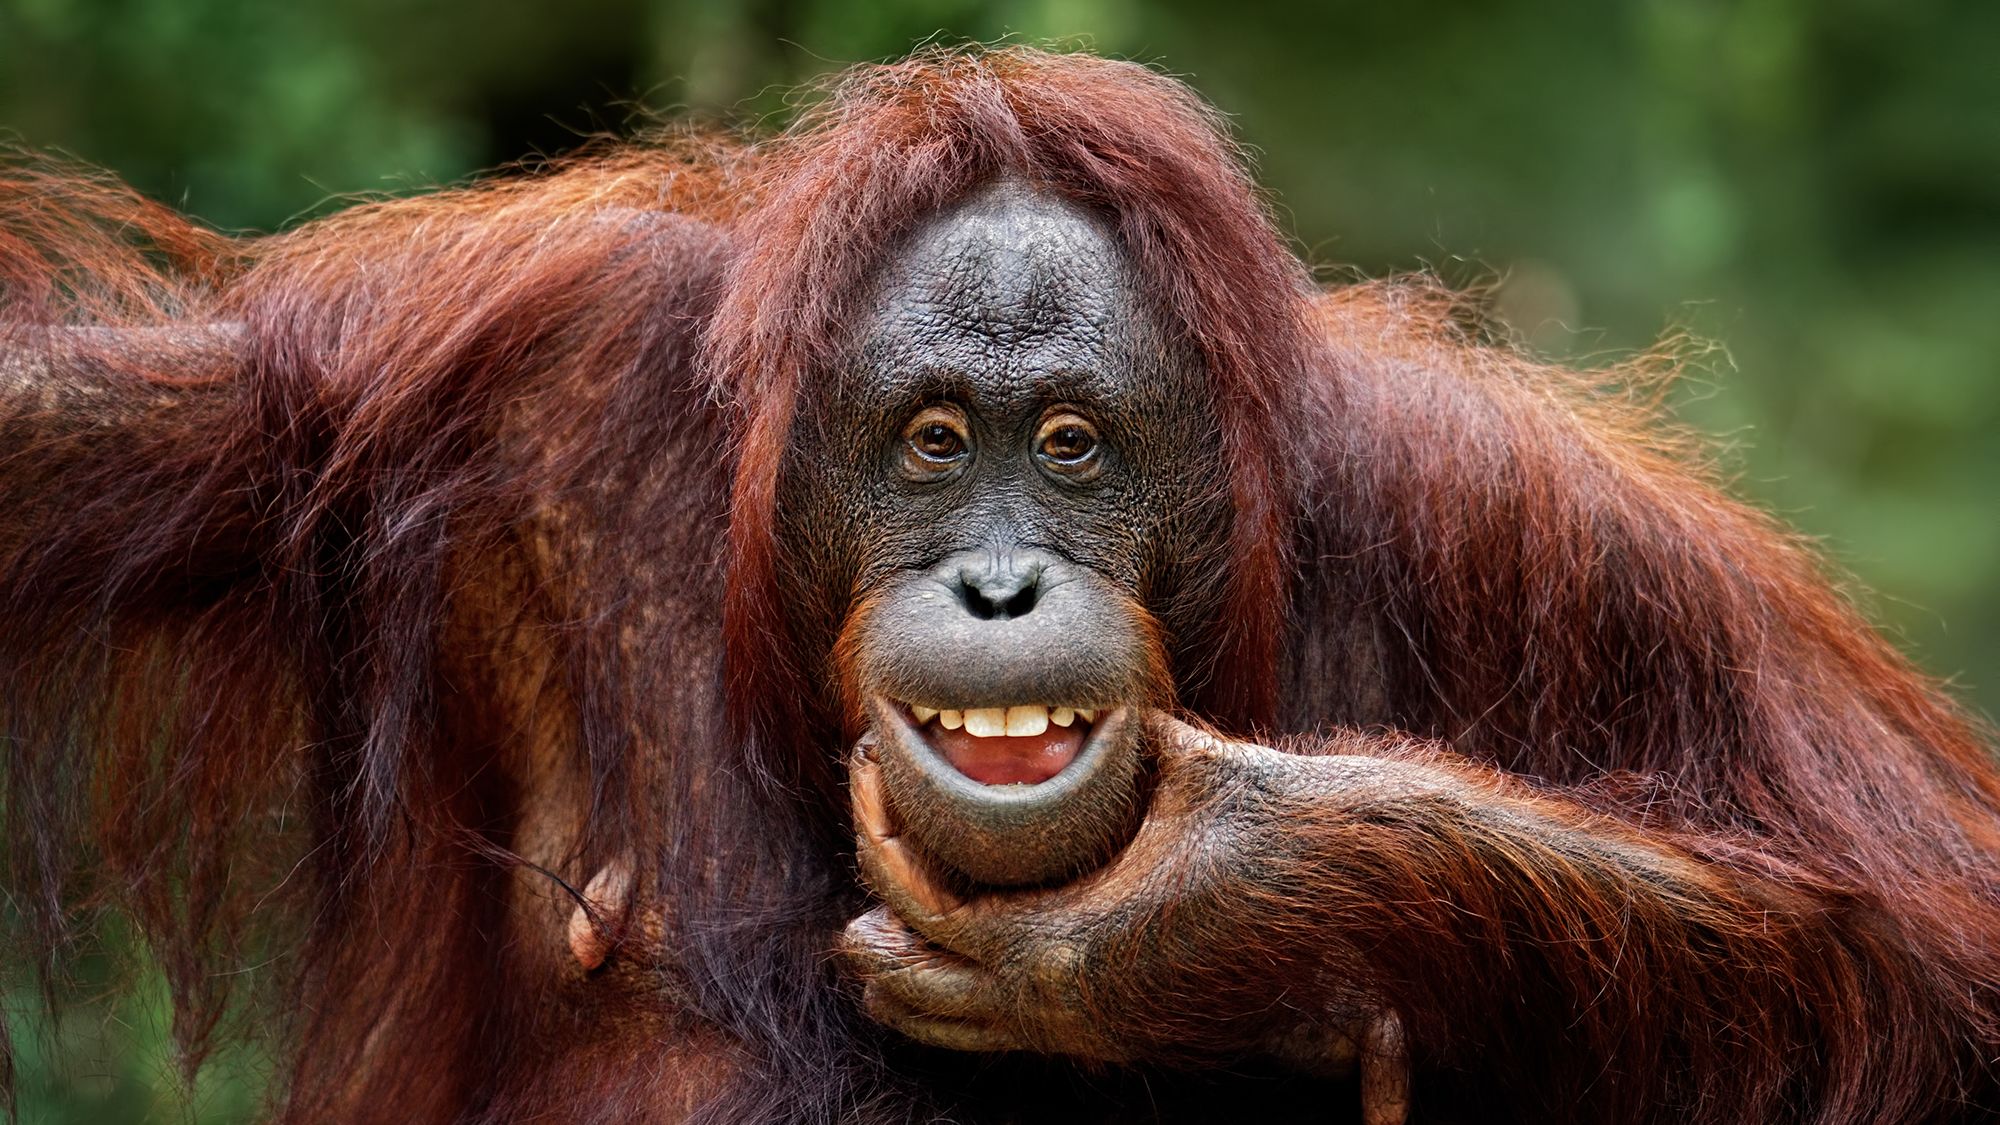 Scientists observed playful teasing in orangutans, chimpanzees, bonobos and gorillas.